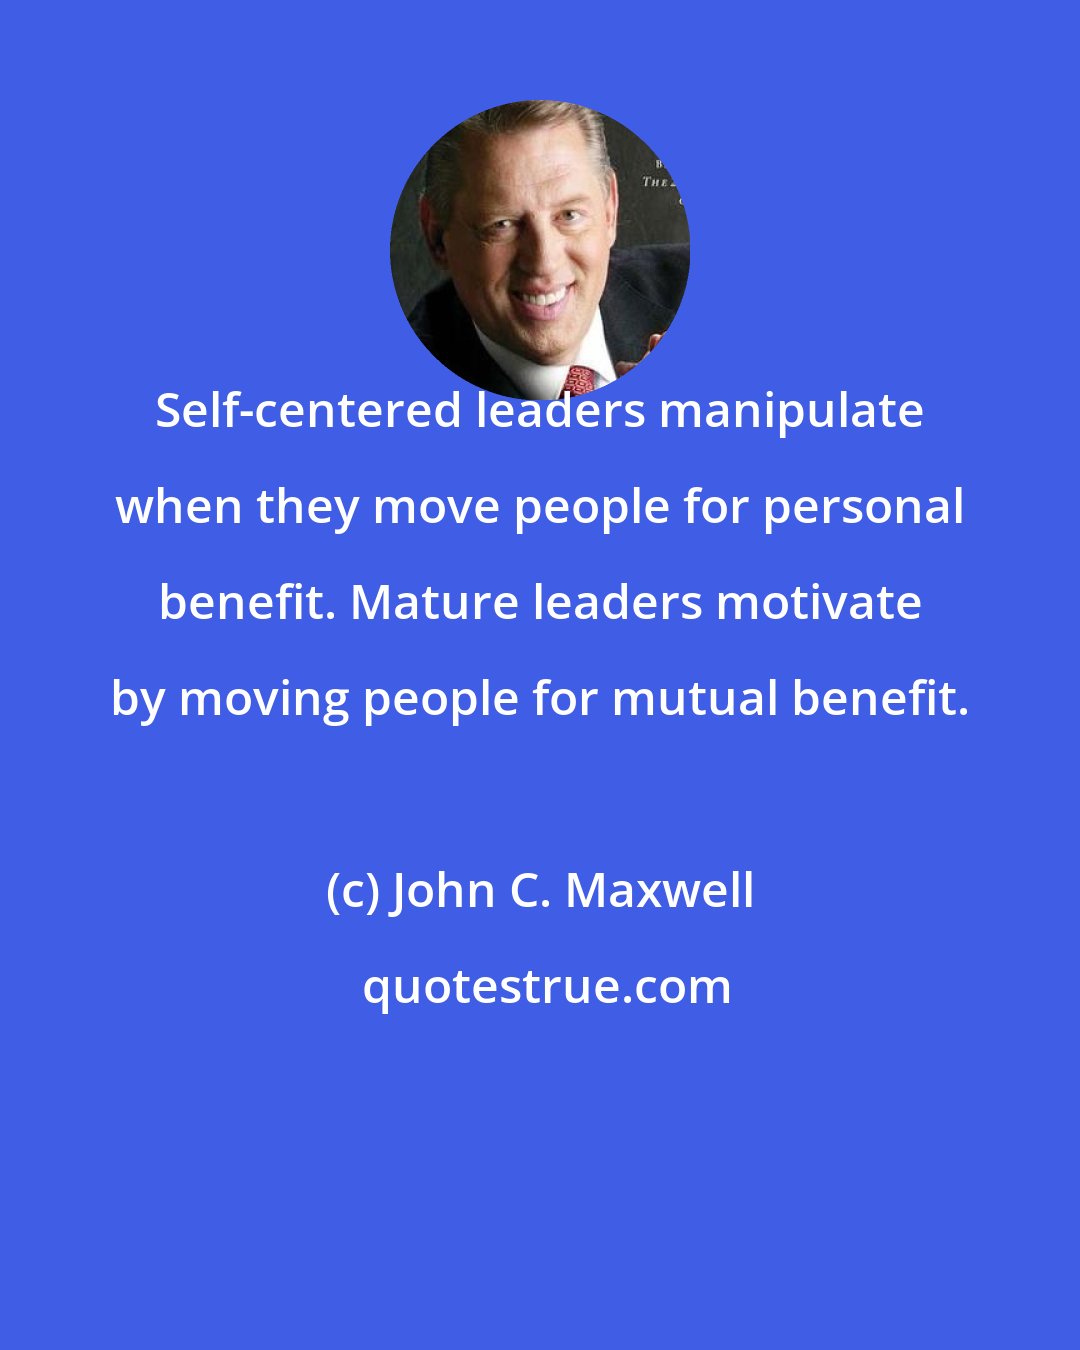 John C. Maxwell: Self-centered leaders manipulate when they move people for personal benefit. Mature leaders motivate by moving people for mutual benefit.